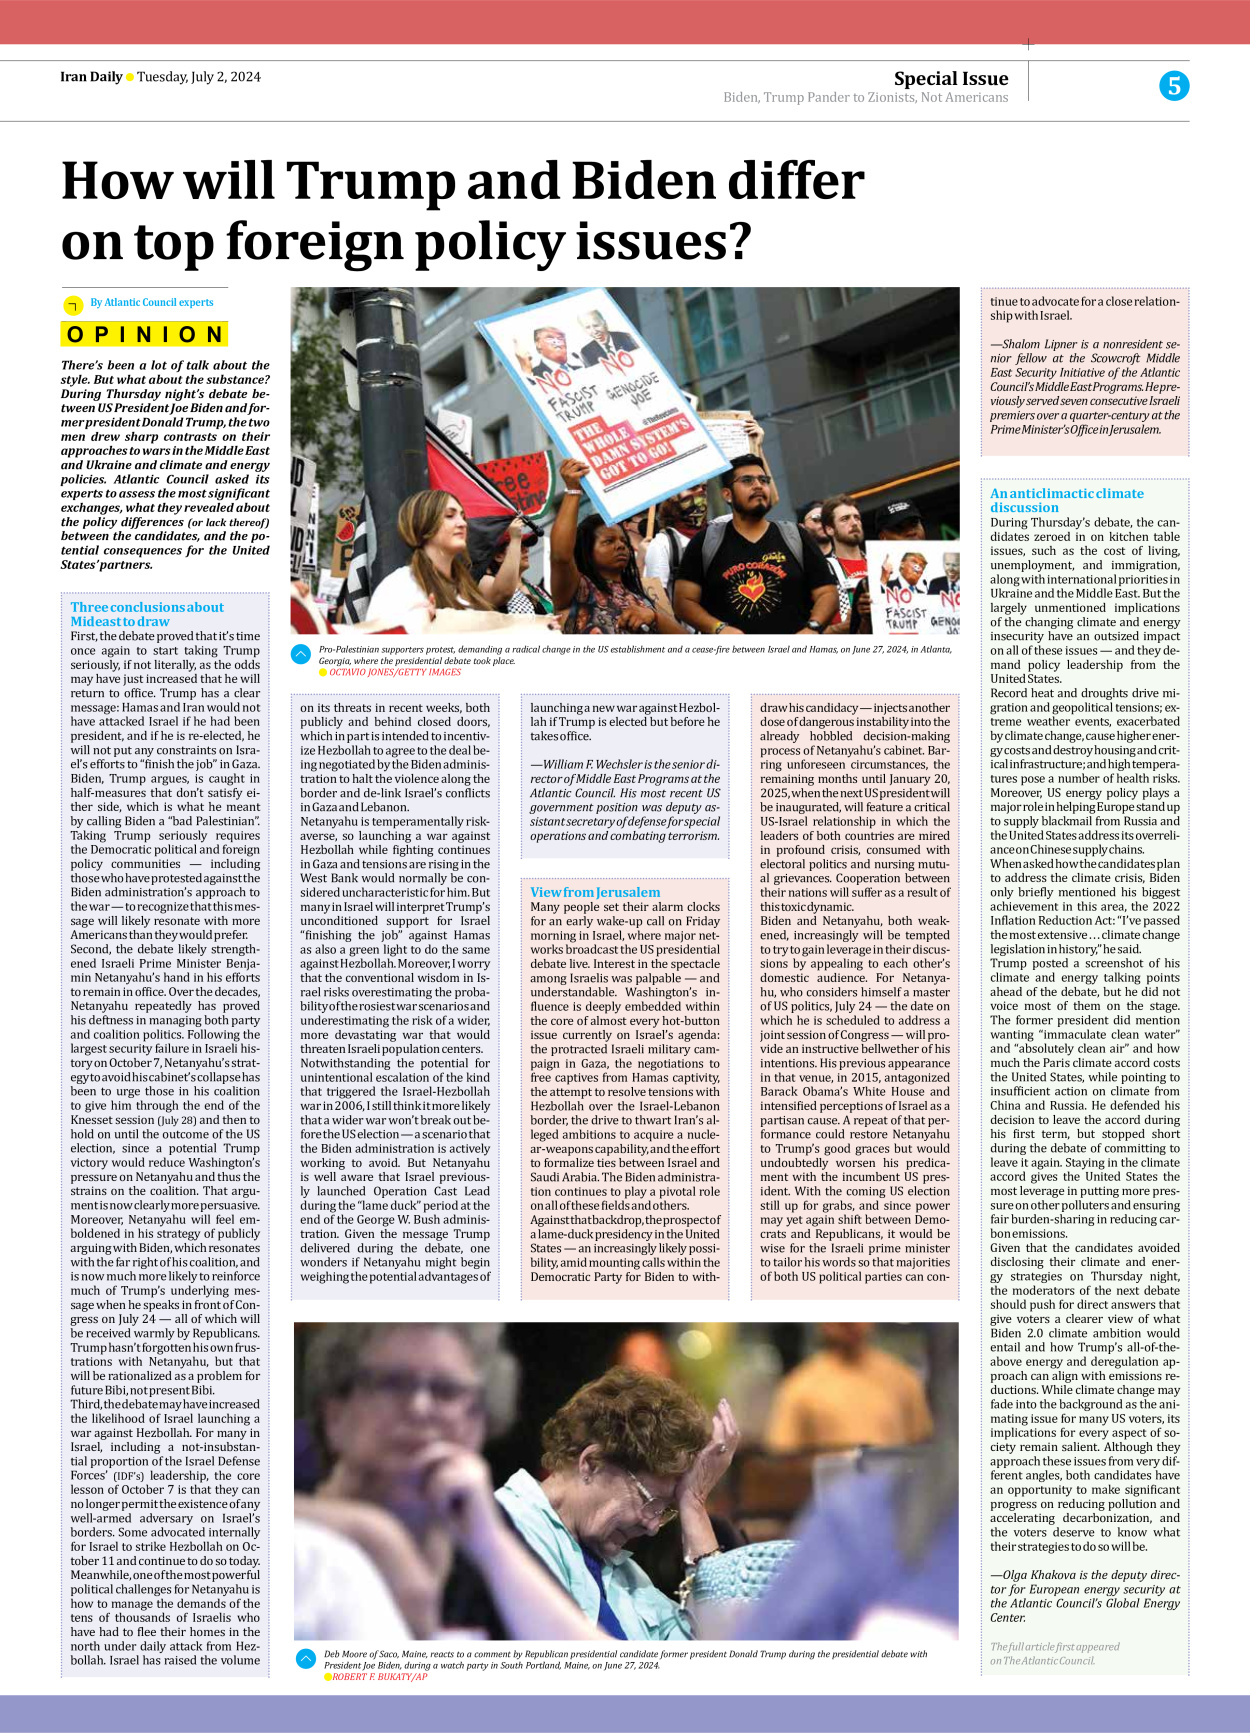 Iran Daily - Number Seven Thousand Five Hundred and Ninety Four - 02 July 2024 - Page 5